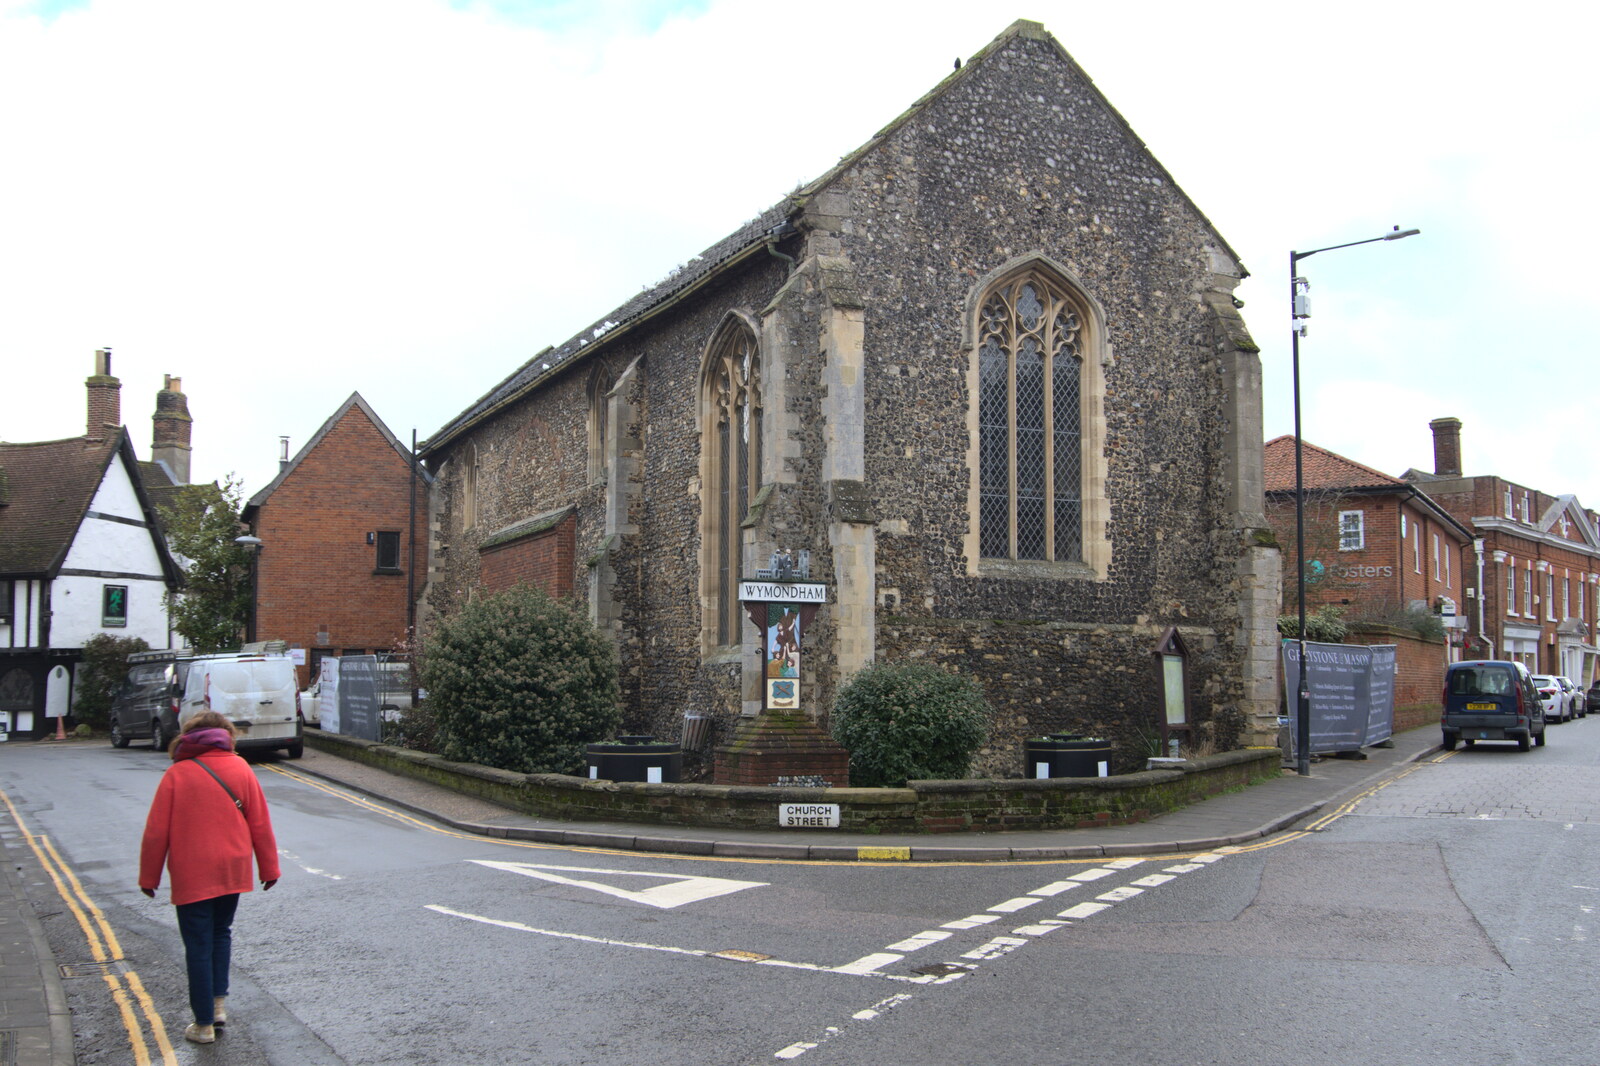 Isobel walks past the Wymondham Arts Centre from A Postcard from Wymondham, Norfolk - 26th January 2023